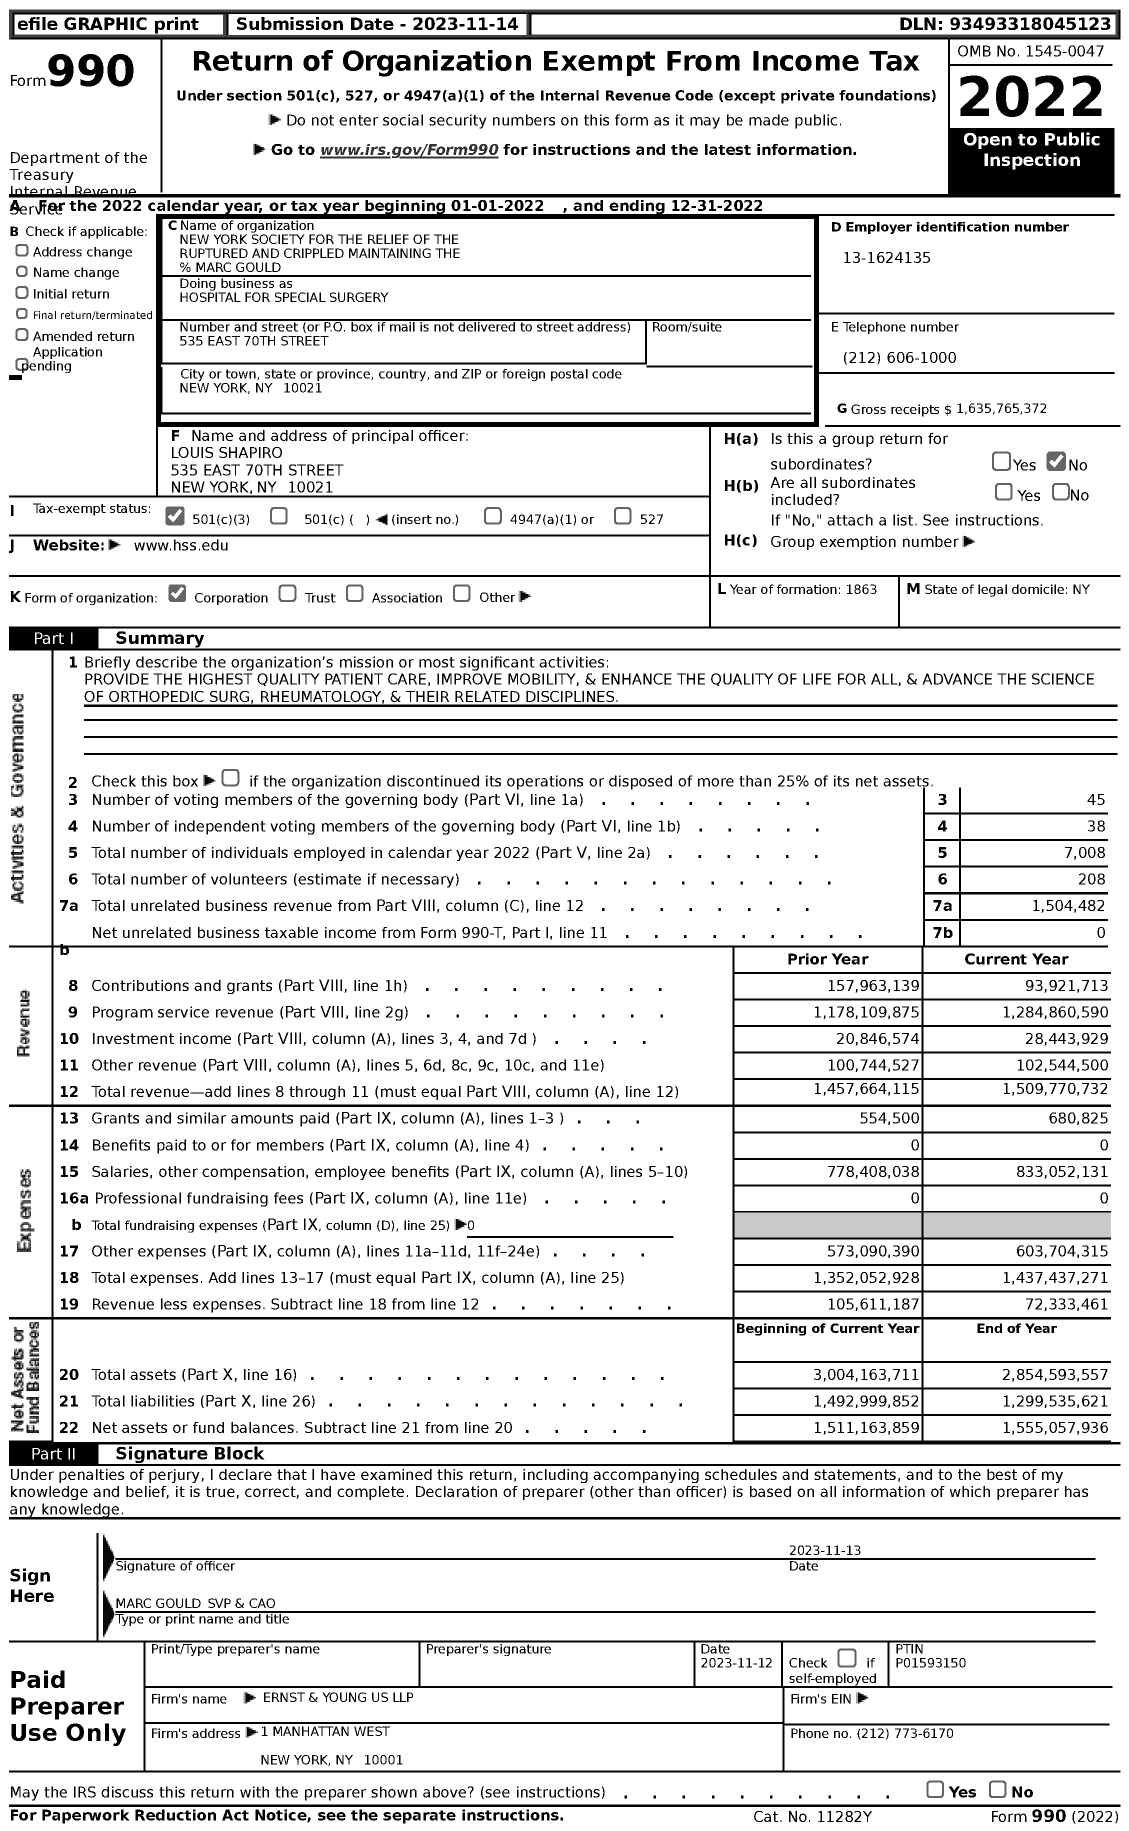 Image of first page of 2022 Form 990 for Hospital for Special Surgery (HSS)